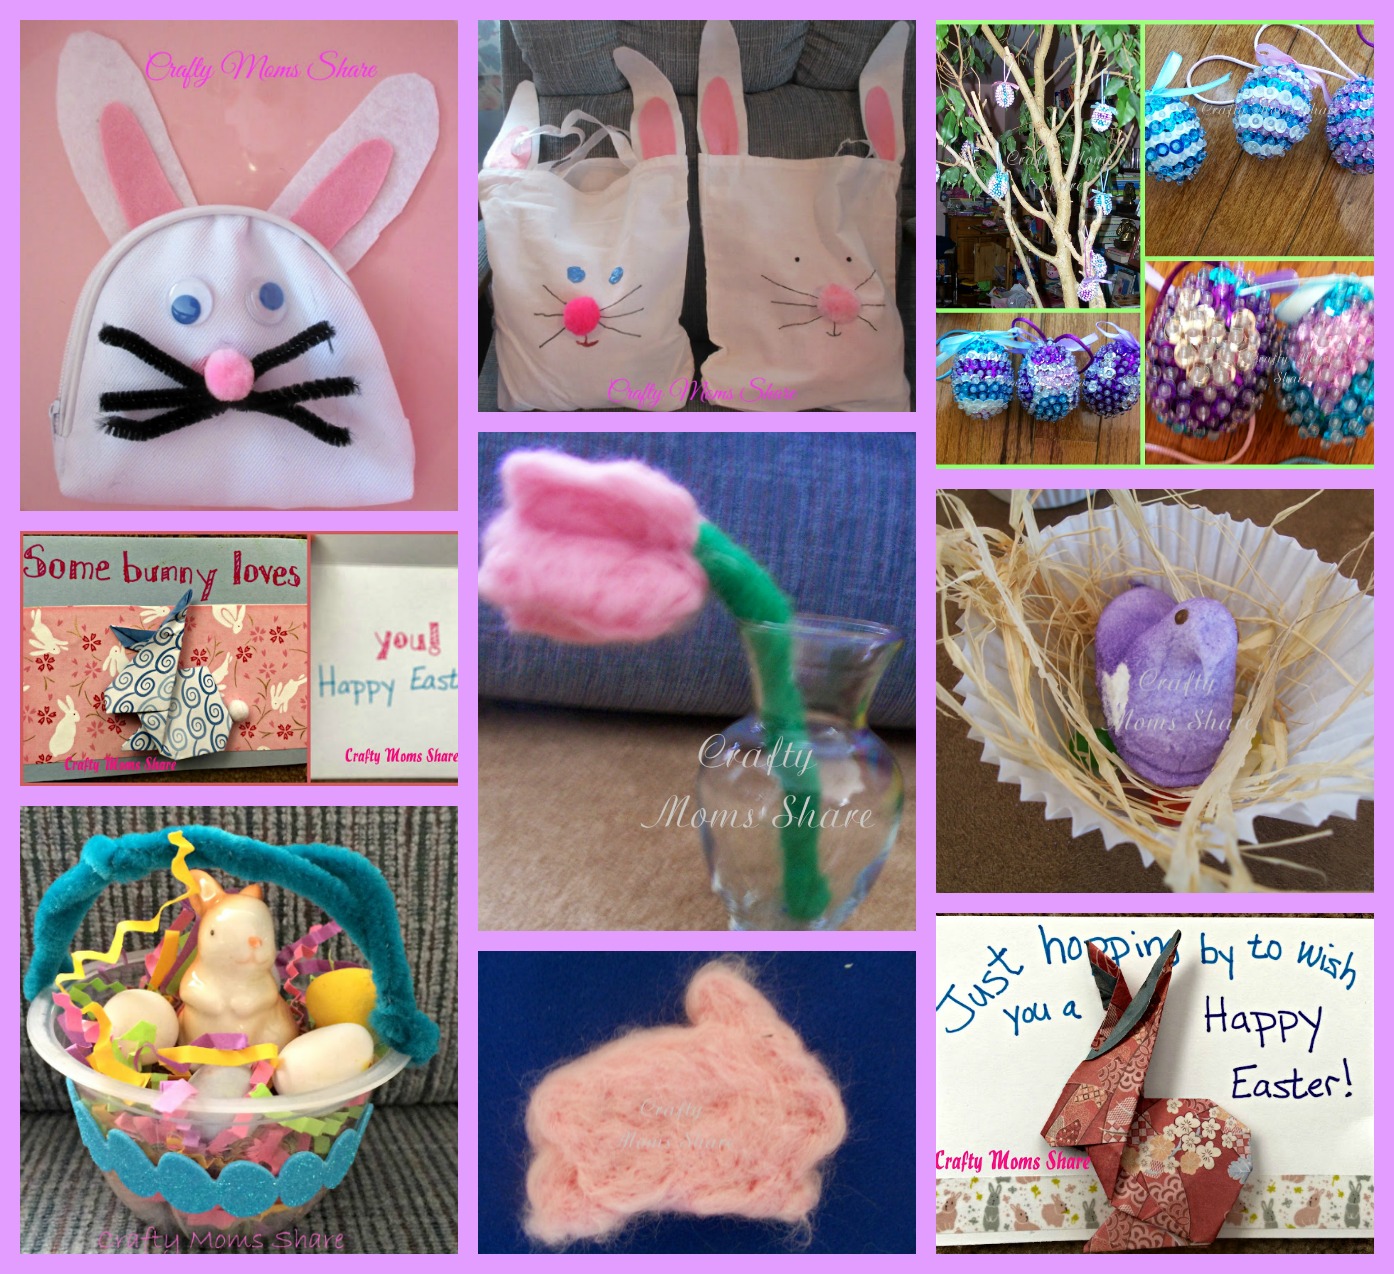 Crafty Moms Share: Happy Easter!! Easter Craft Round-up from Crafty Moms  Share and Our Link Parties!